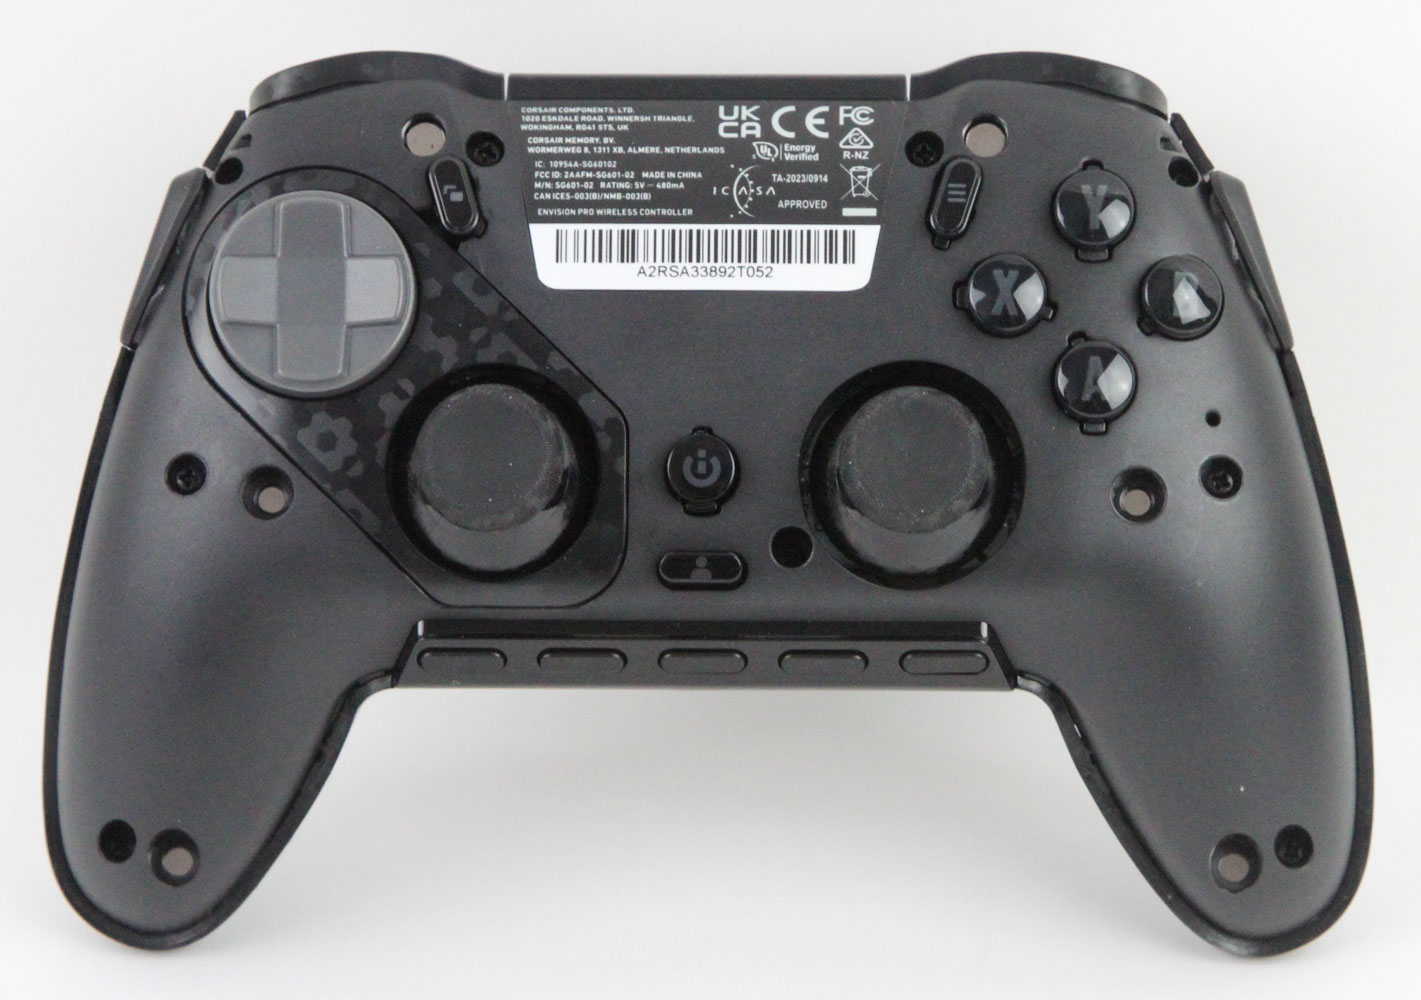 SCUF Envision Pro PC Gaming Controller Review - User Experience